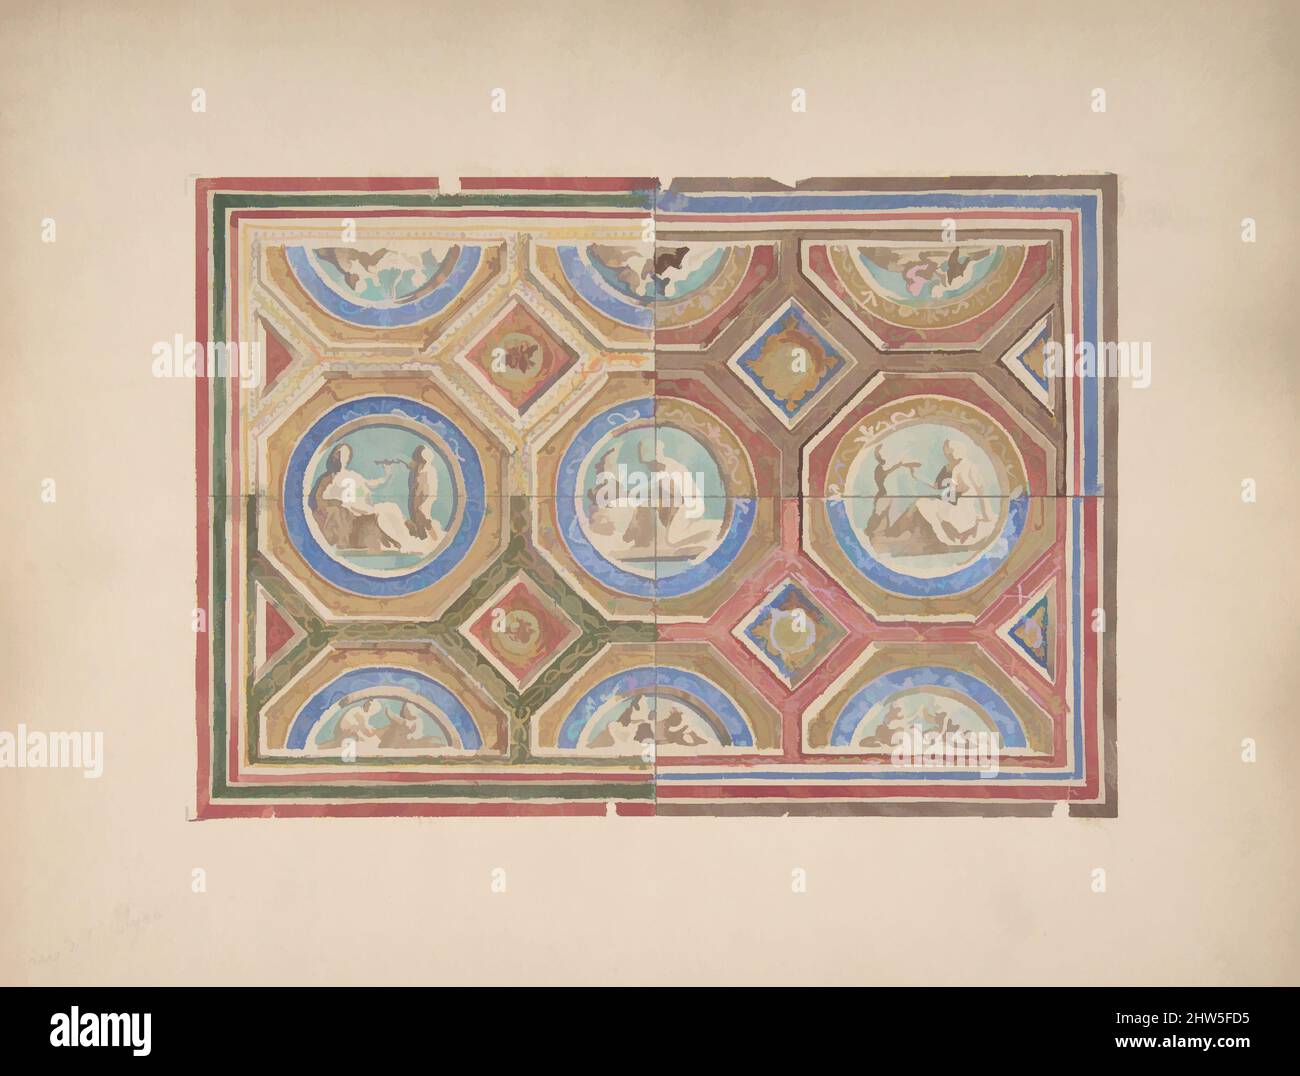 Art inspired by Design for Coffered Ceiling in Four Alternate Color Schemes, Empress Eugenie's Hotel, second half 19th century, Graphite, watercolor, and gilt, 5 3/8 x 7 11/16 in. (13.7 x 19.6 cm), Drawings, Jules-Edmond-Charles Lachaise (French, died 1897), Eugène-Pierre Gourdet (, Classic works modernized by Artotop with a splash of modernity. Shapes, color and value, eye-catching visual impact on art. Emotions through freedom of artworks in a contemporary way. A timeless message pursuing a wildly creative new direction. Artists turning to the digital medium and creating the Artotop NFT Stock Photo